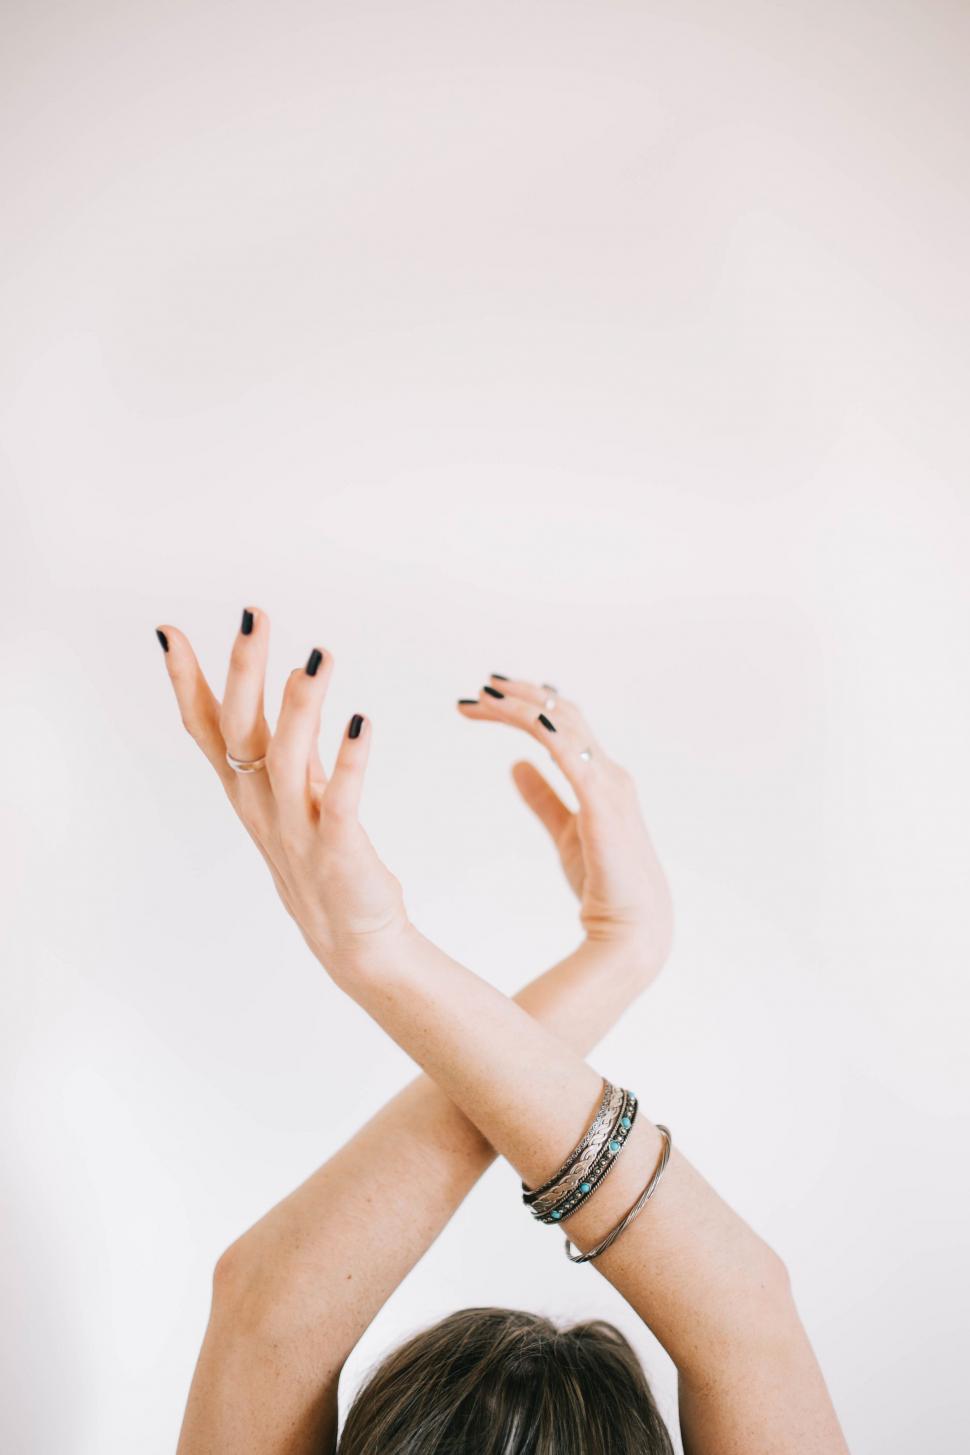 Free Image of Woman Raising Her Hands in the Air 